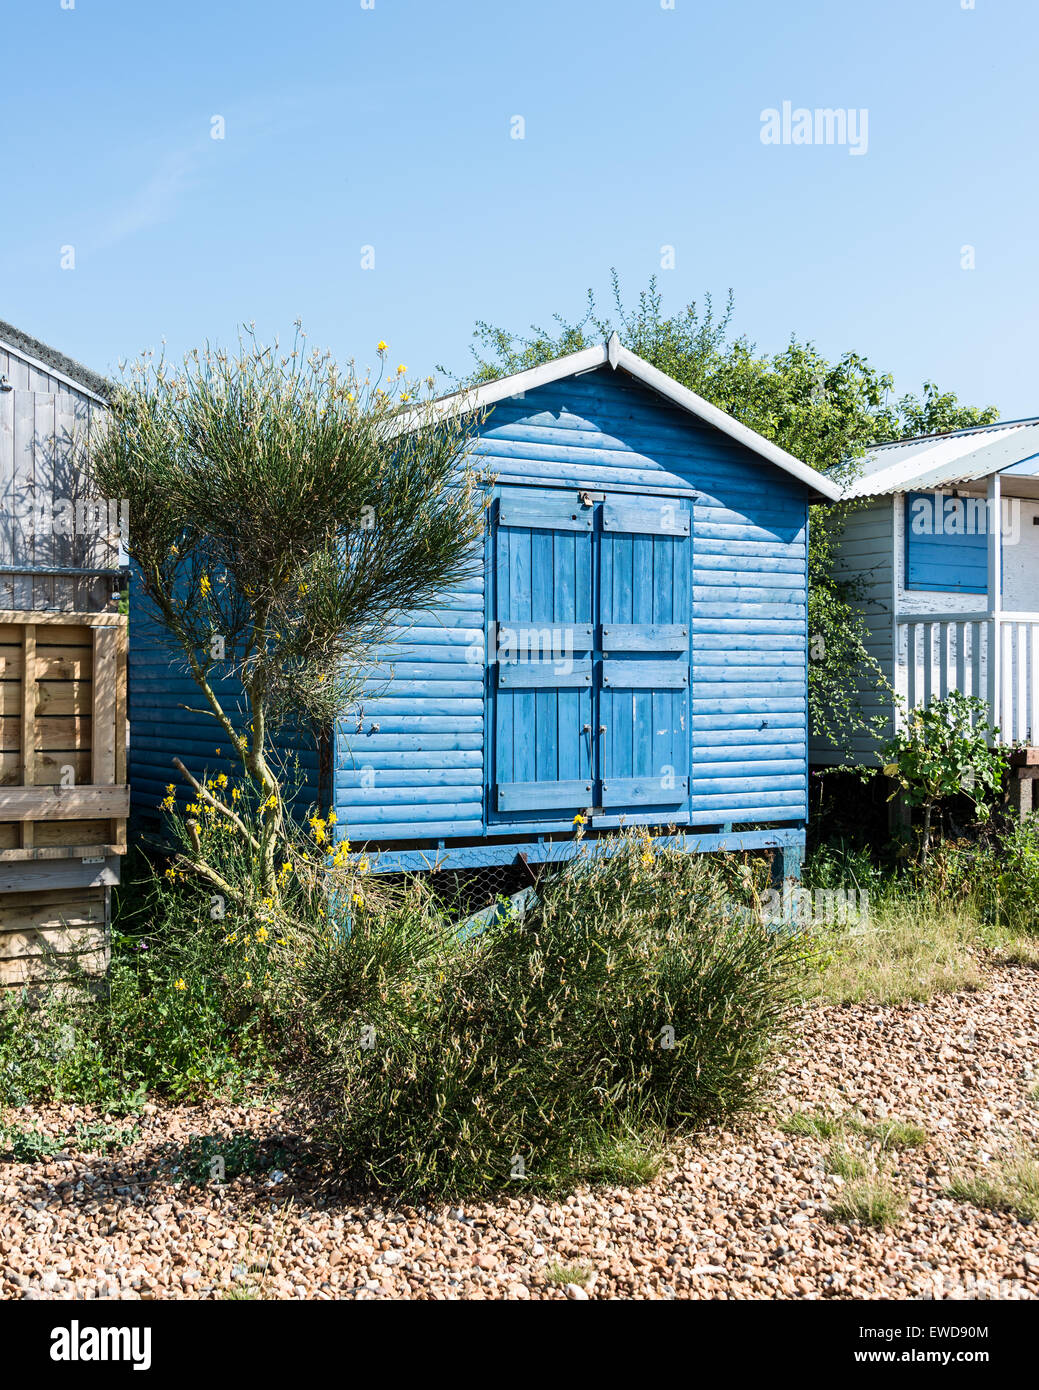 Blue beach hut with stable doors Stock Photo